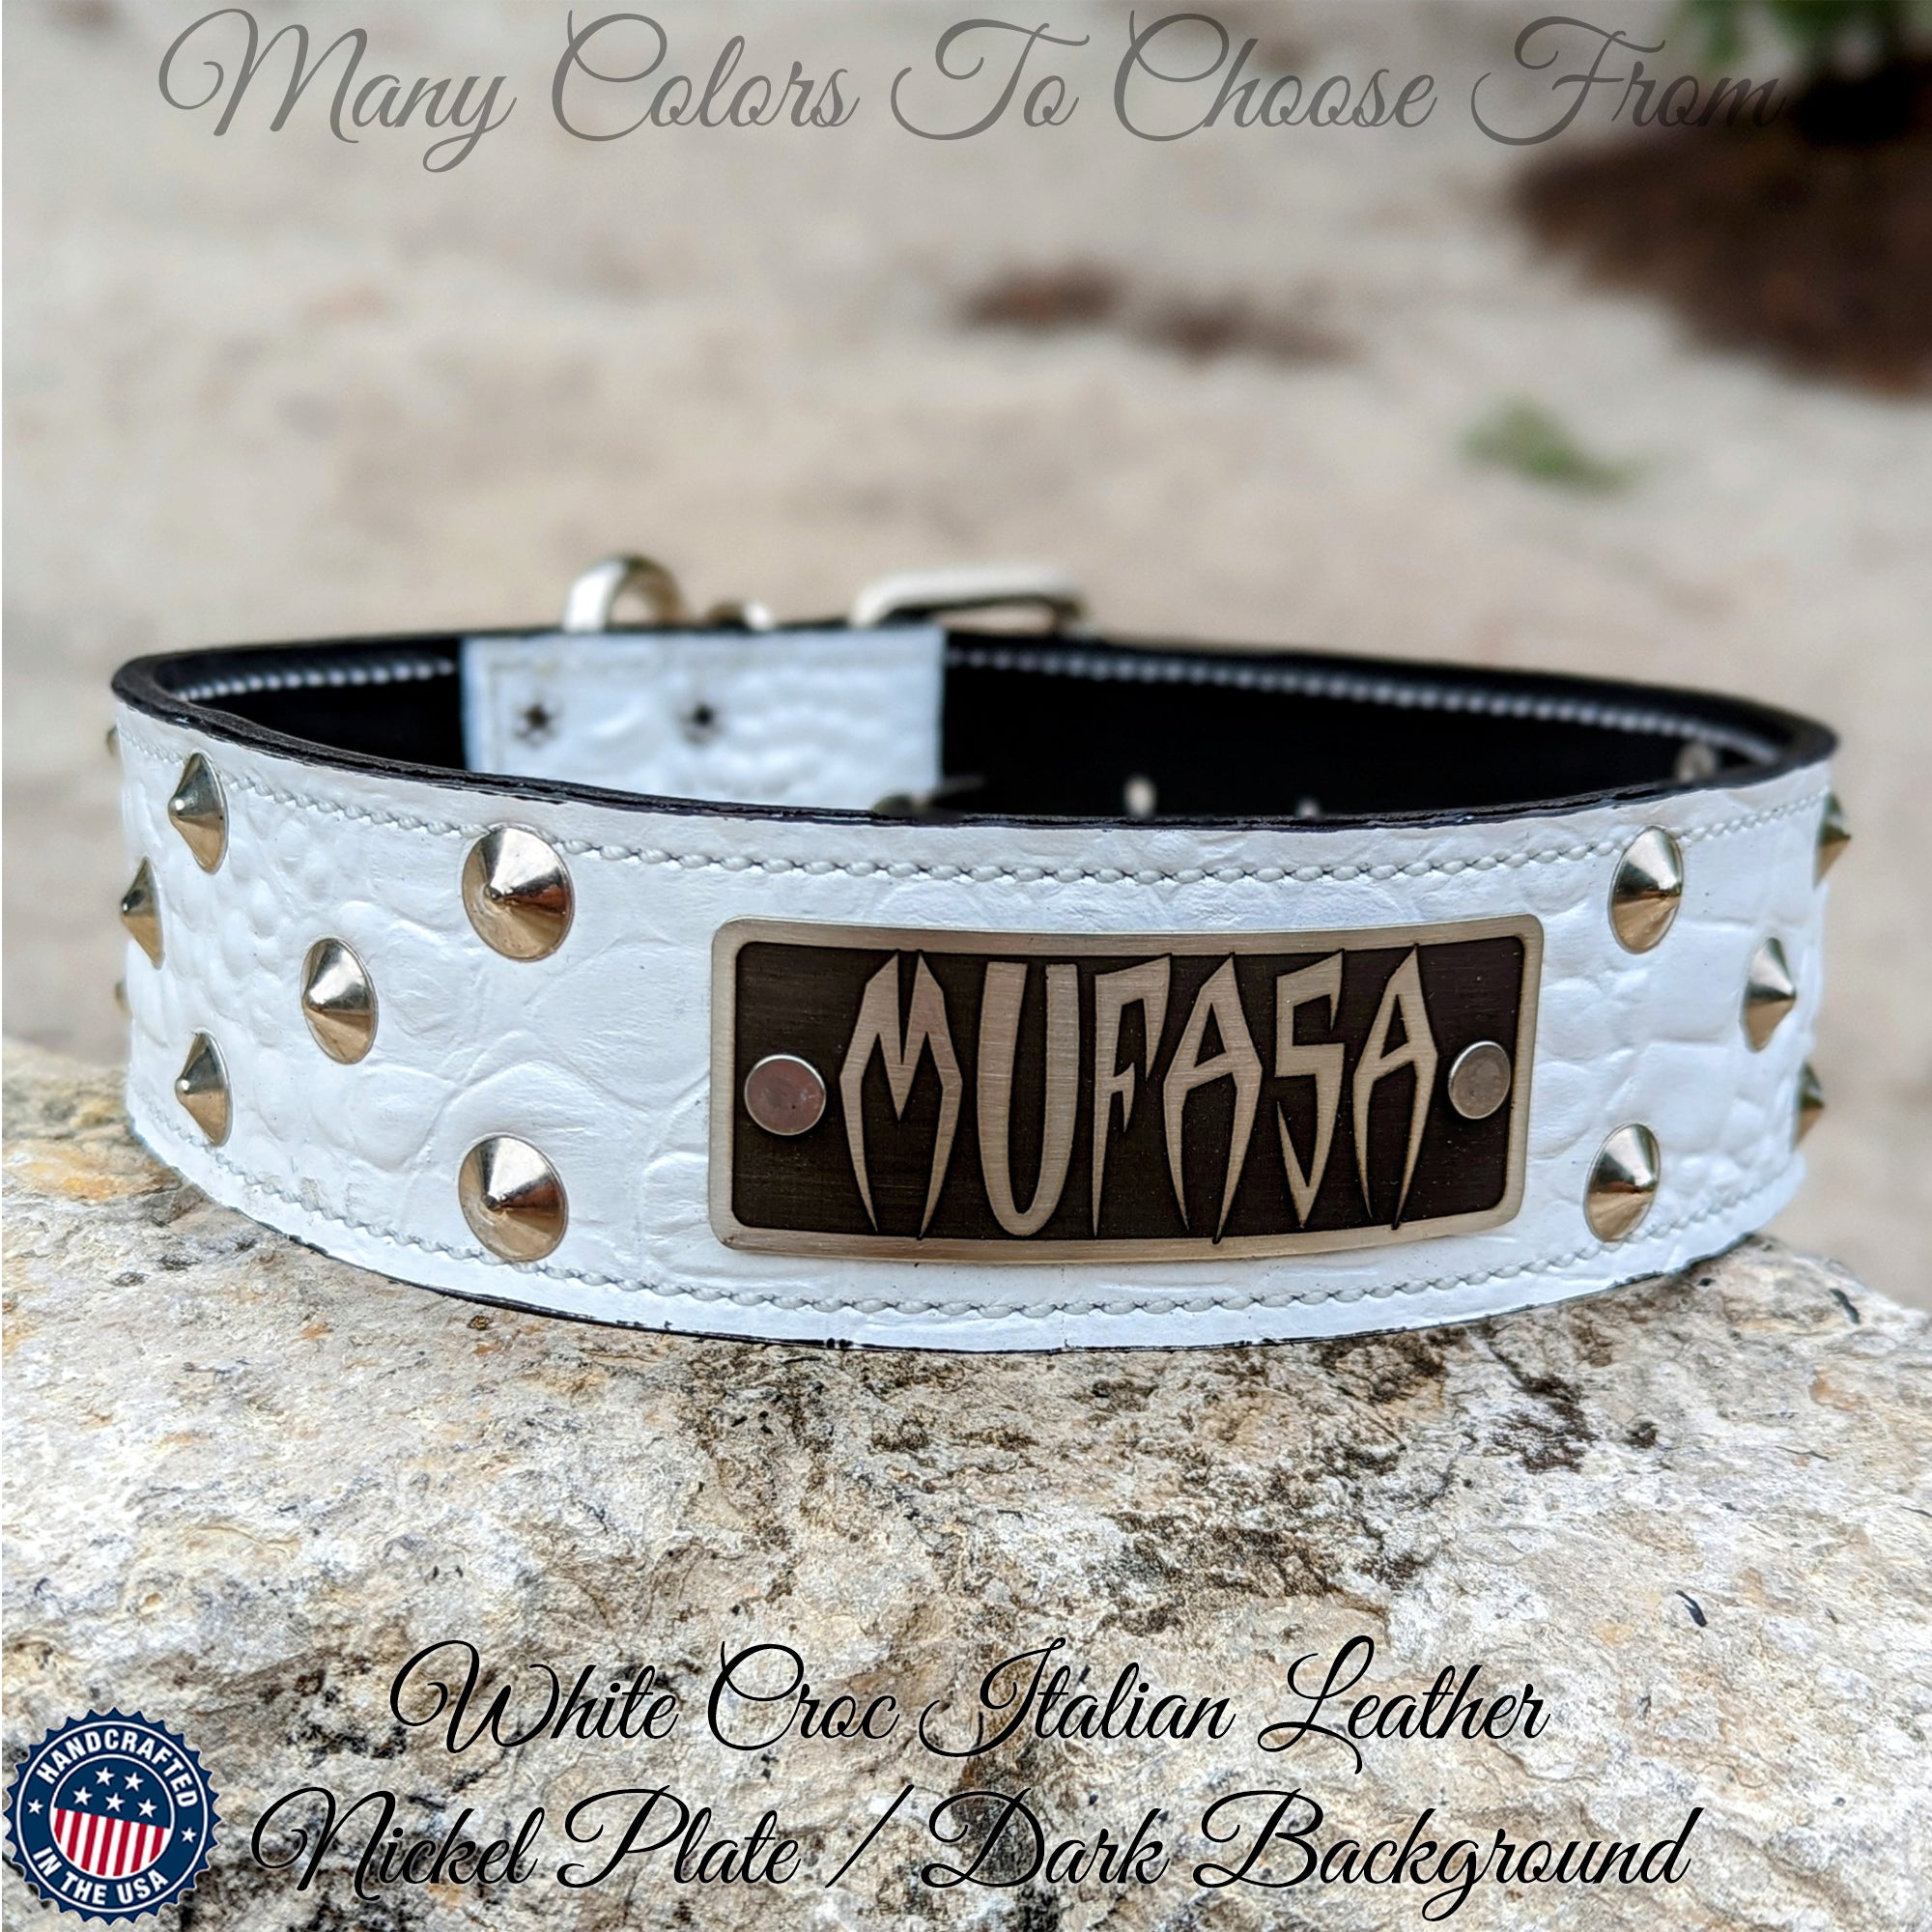 English Bridle Leather Dog Collar with Name Plate